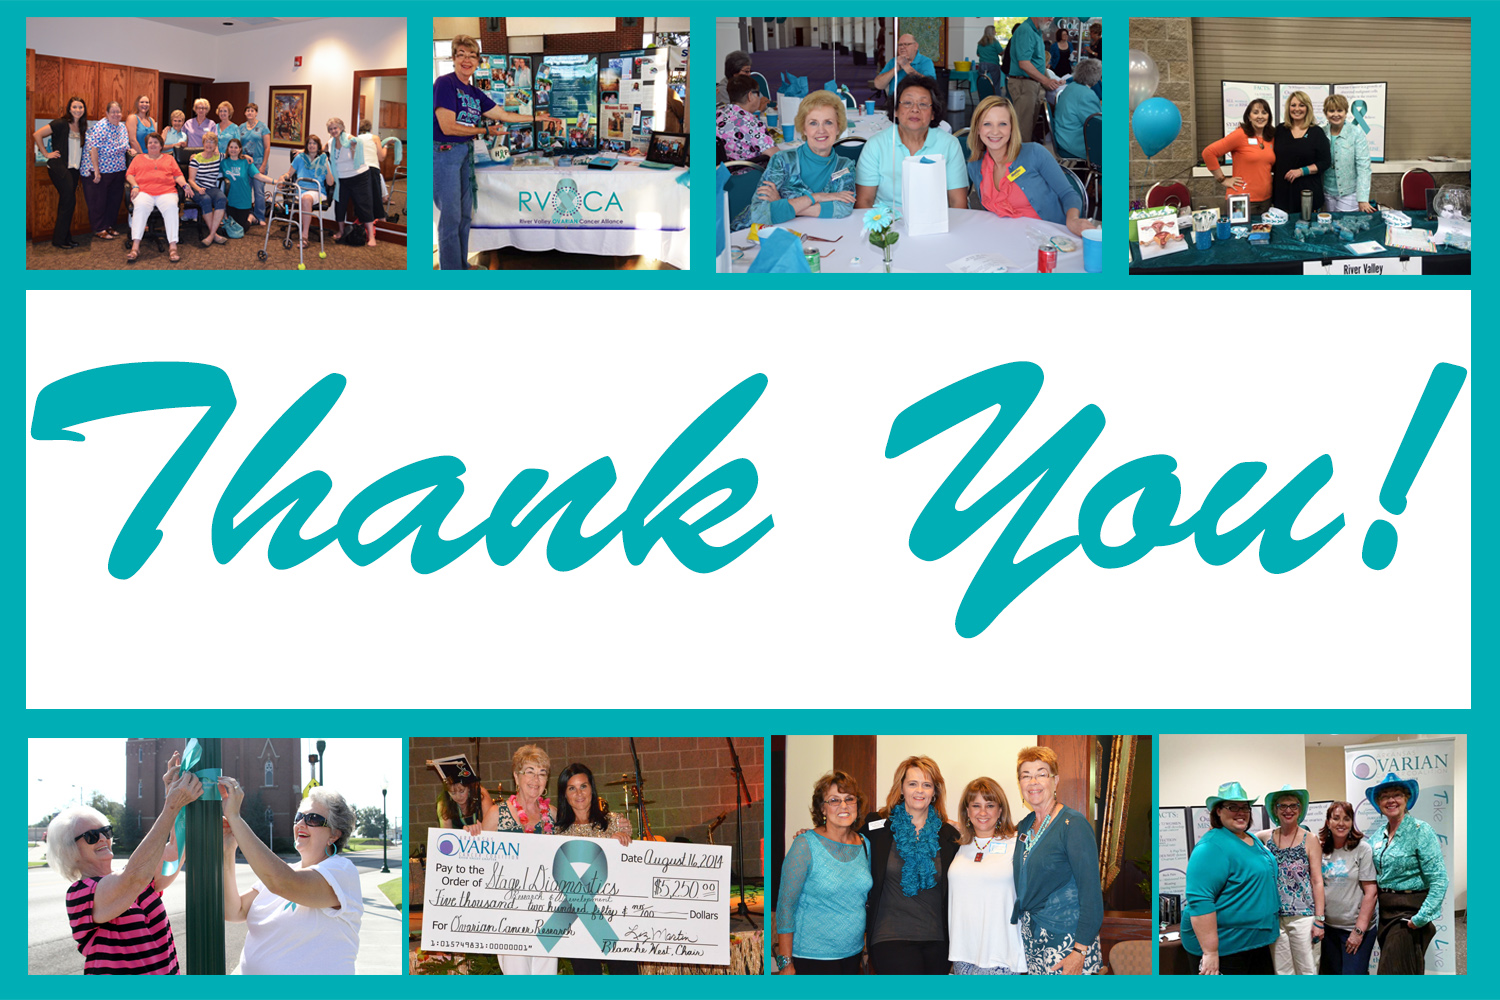 Thank You from the River Valley Ovarian Cancer Alliance